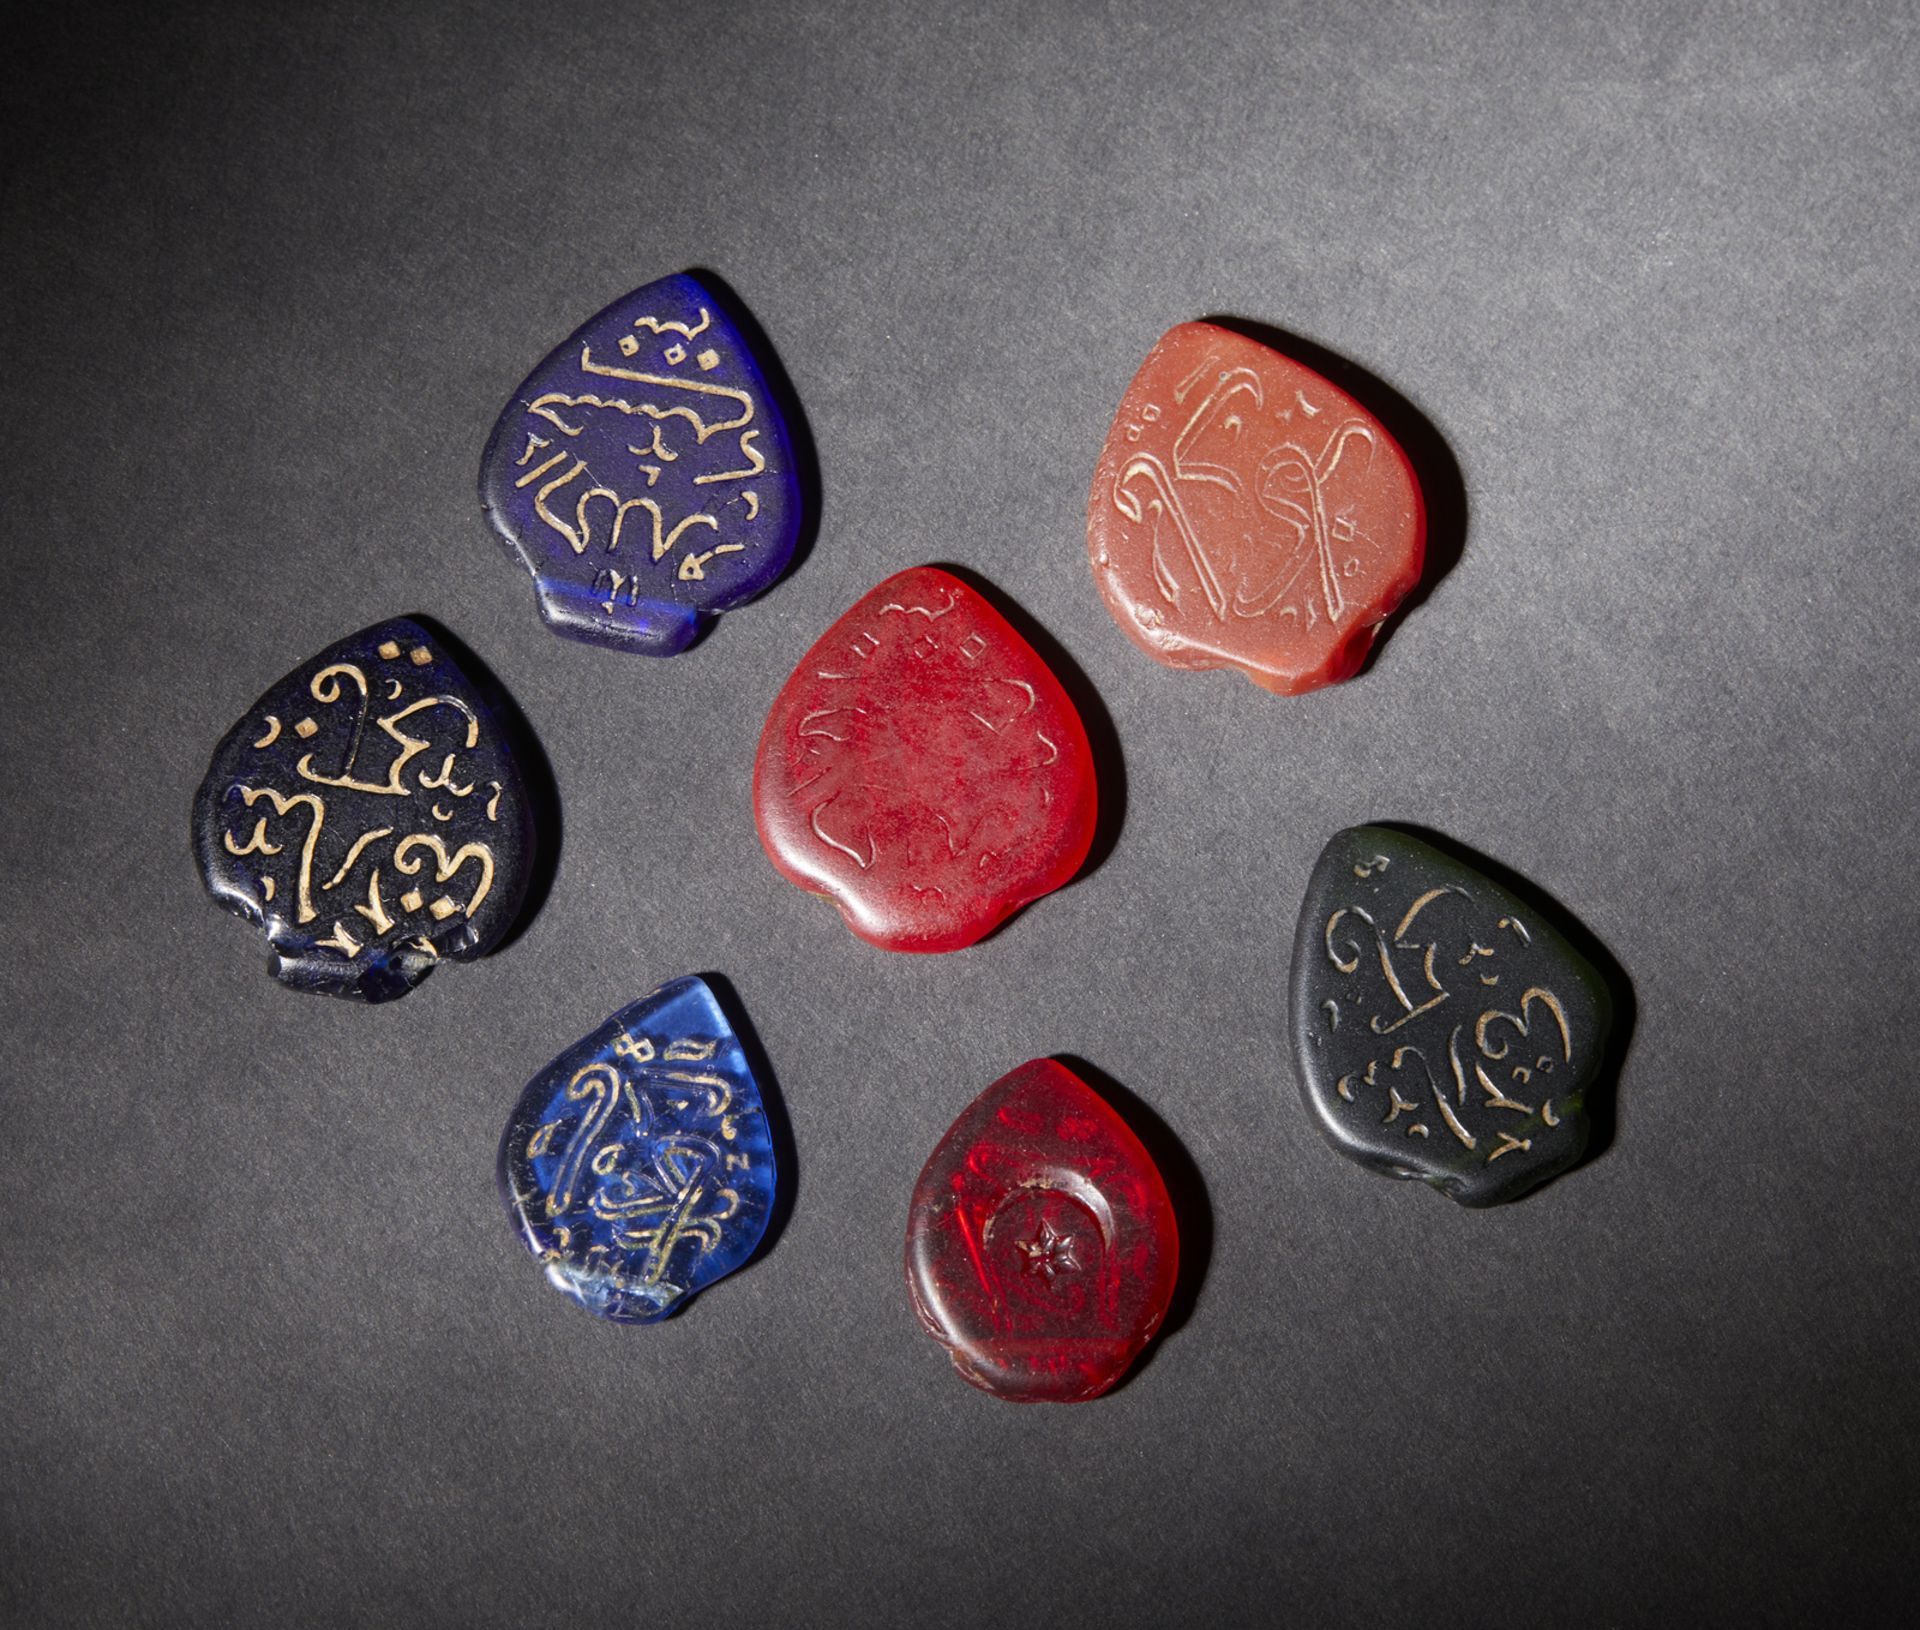 A group of 7 hard stone inscribed amulets Middle East, early 20th centuryThe size shown refers to